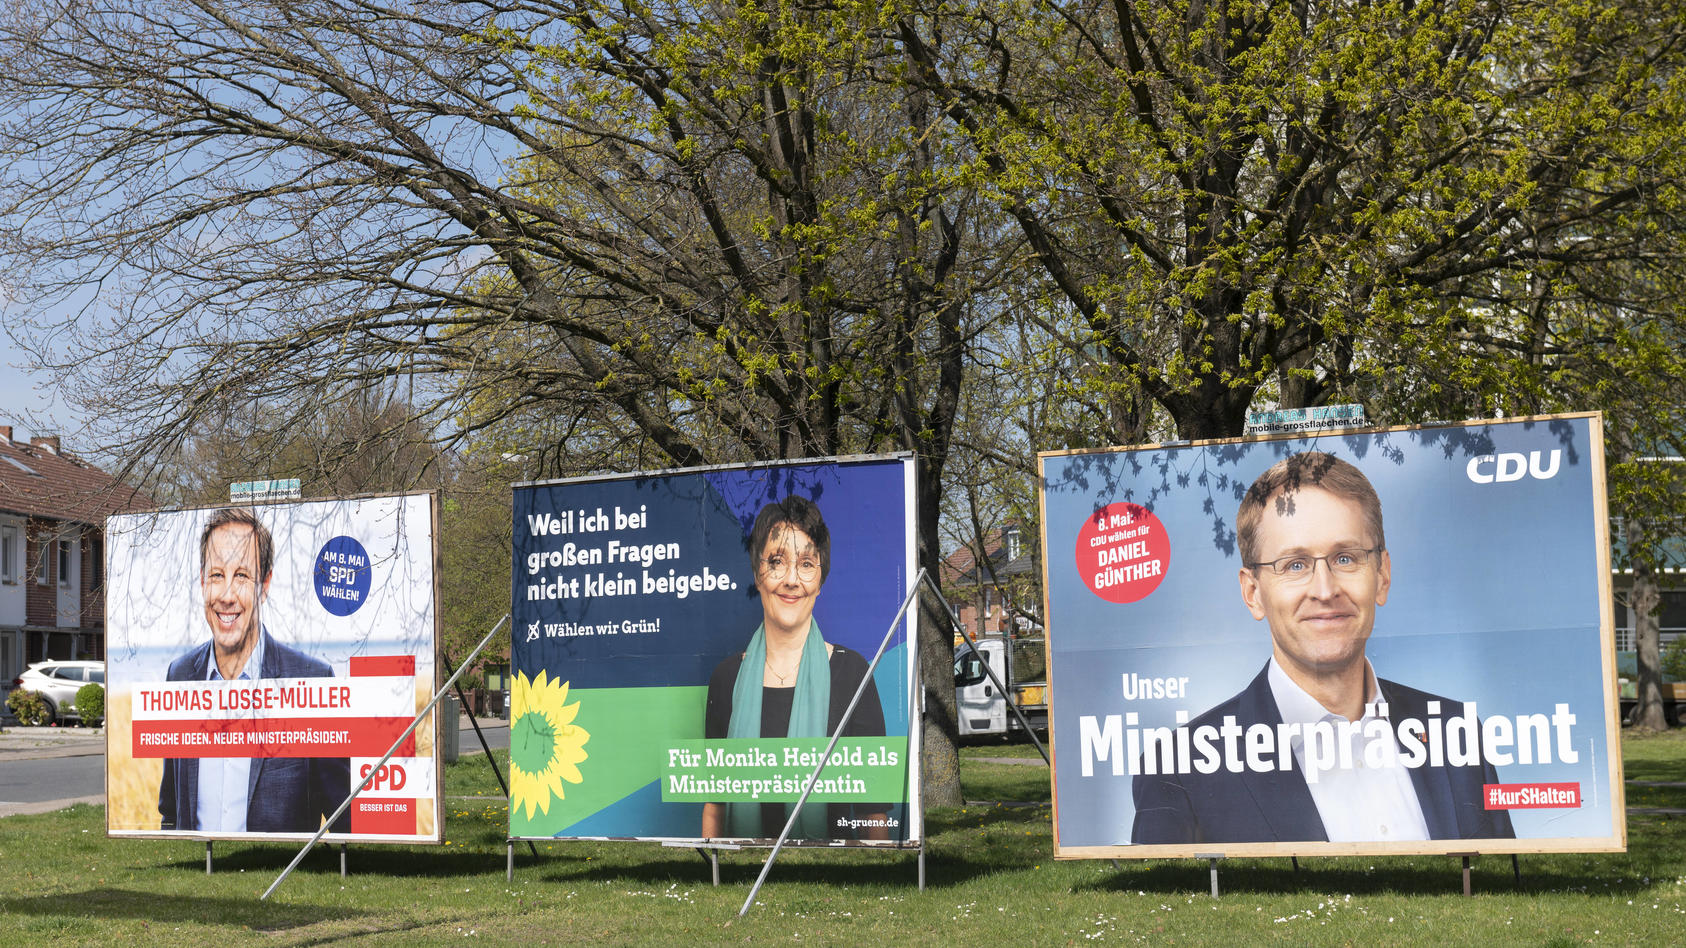  Lauenburg/Elbe, Schleswig-Holstein, Germany 25th April 2022 Election posters for the upcoming Schleswig-Holstein state parliament elections due to be held on the 8th of May. Poster for the candidate to be Minister-president, the so-called Spitzenkan